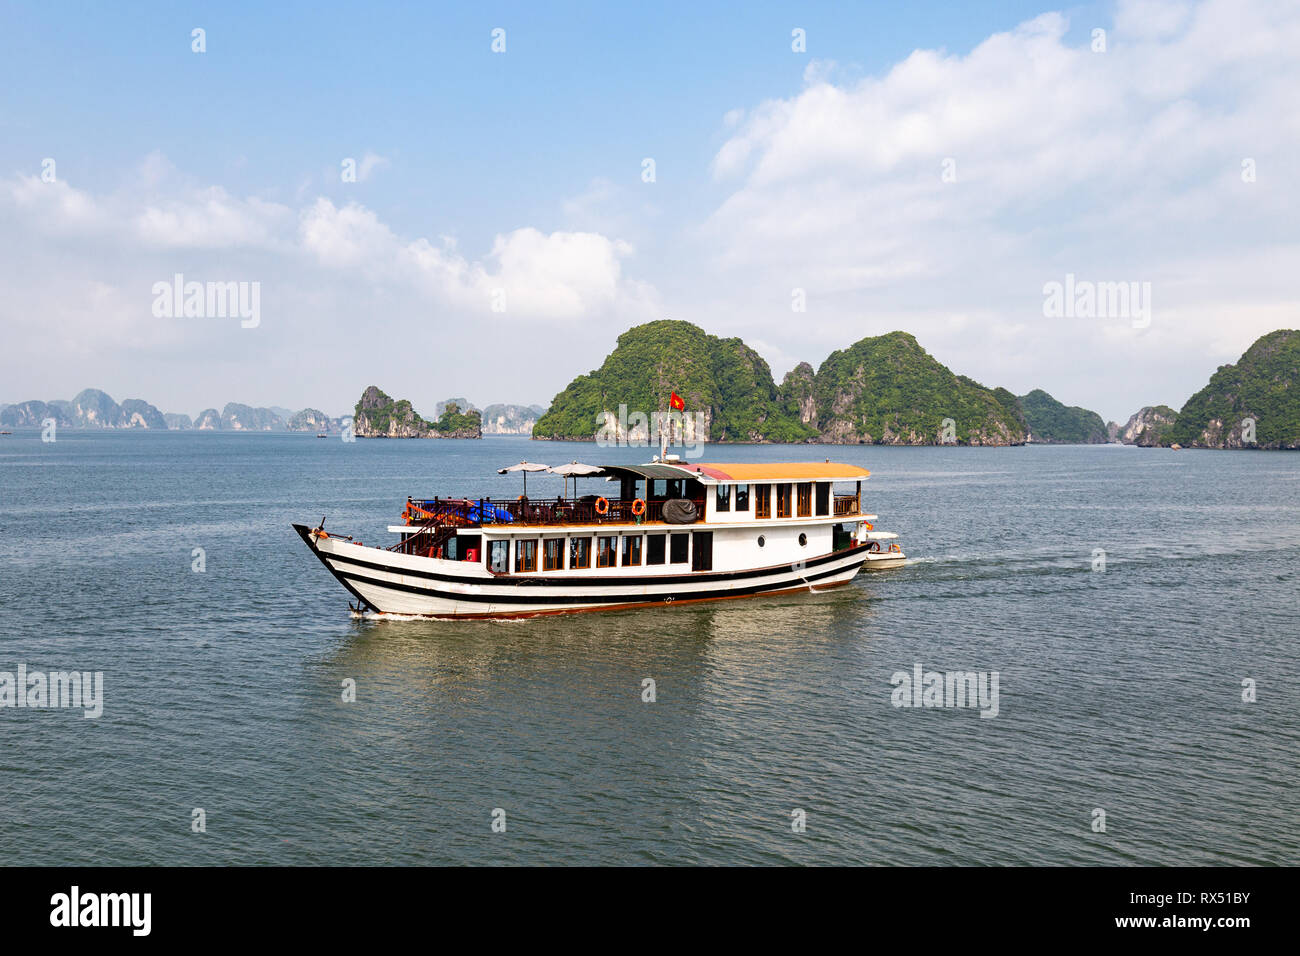 One of the many tour boats sailing among the karst formations in Halong Bay, Vietnam, in the gulf of Tonkin. Halong Bay is a UNESCO World Heritage Sit Stock Photo